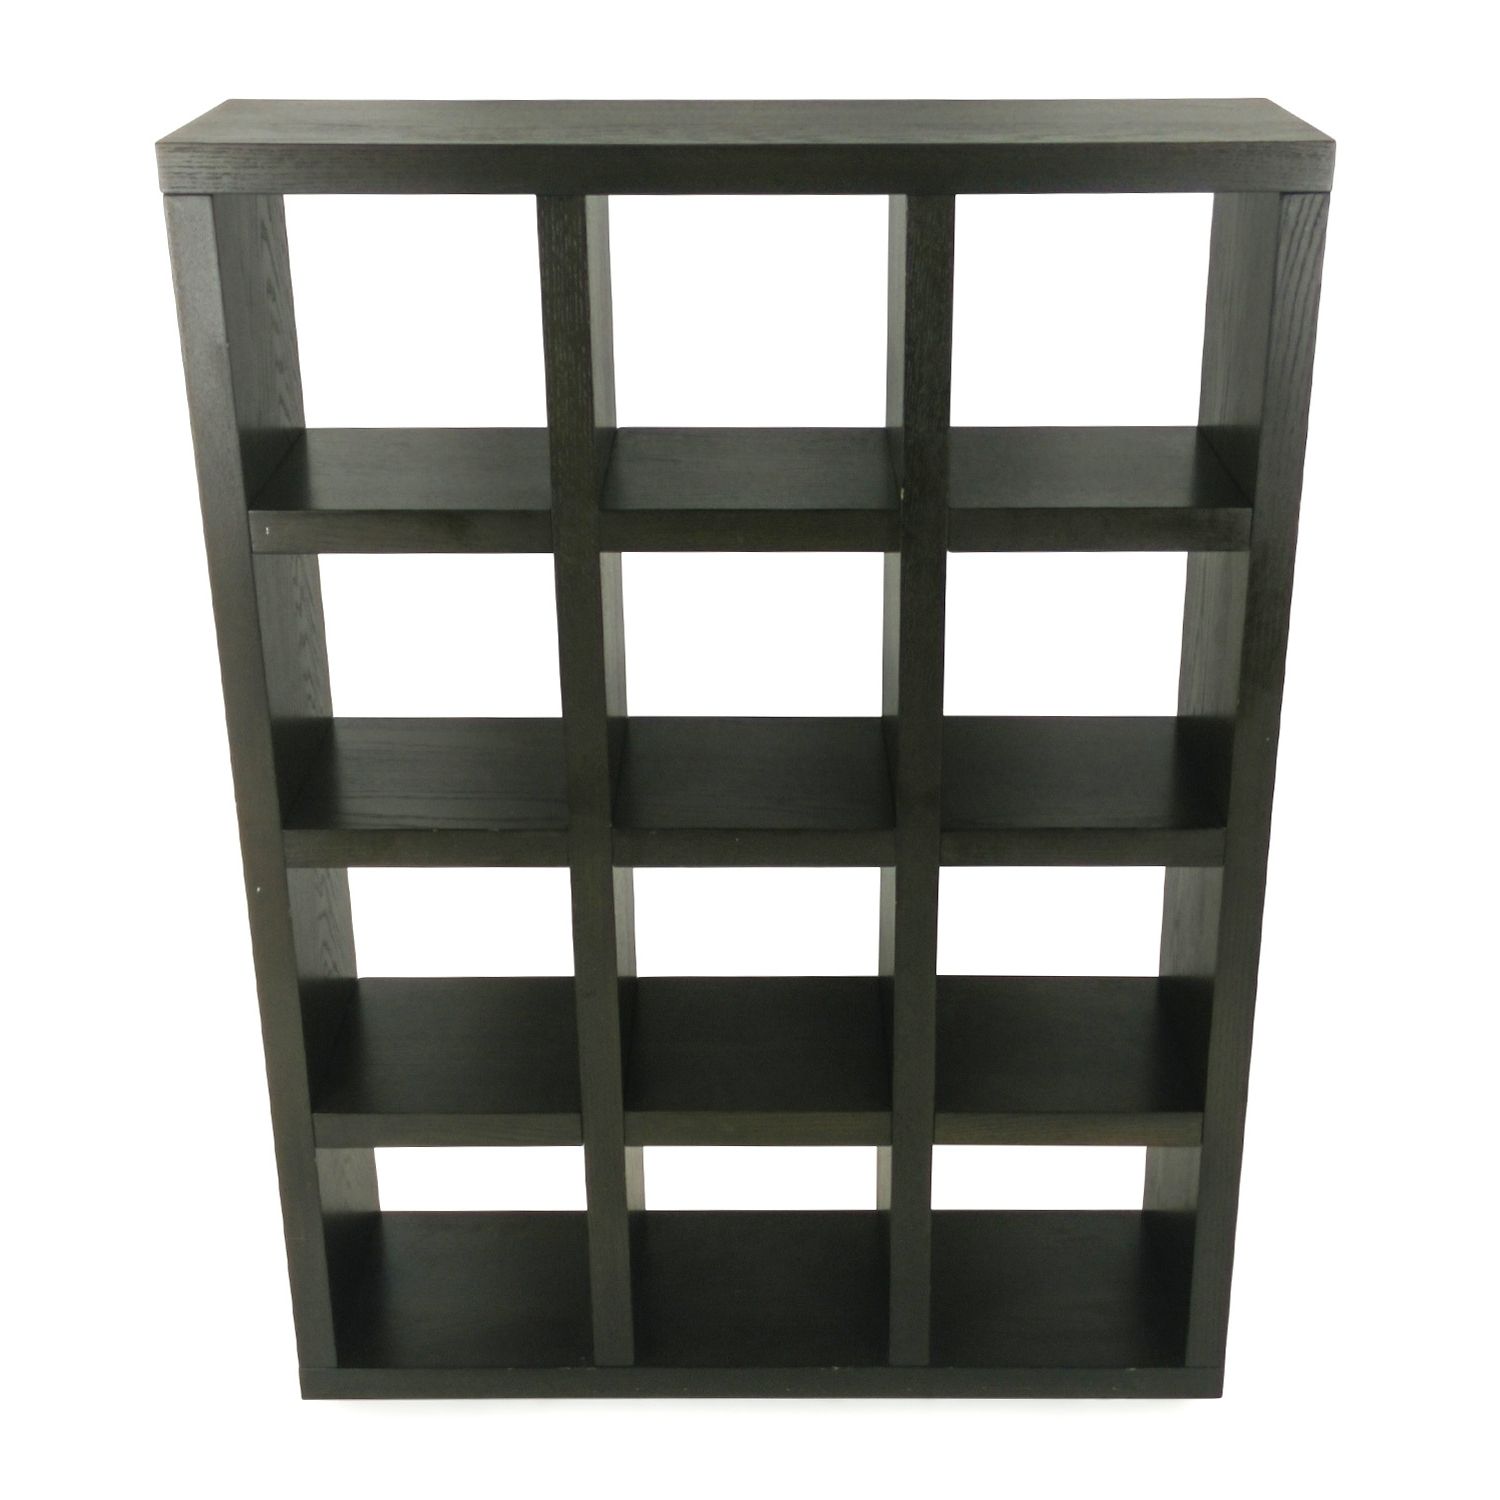 [%84% Off – West Elm West Elm Book Shelf / Storage With Regard To Newest West Elm Bookcases|west Elm Bookcases Within Most Recently Released 84% Off – West Elm West Elm Book Shelf / Storage|preferred West Elm Bookcases Regarding 84% Off – West Elm West Elm Book Shelf / Storage|famous 84% Off – West Elm West Elm Book Shelf / Storage With West Elm Bookcases%] (View 3 of 15)